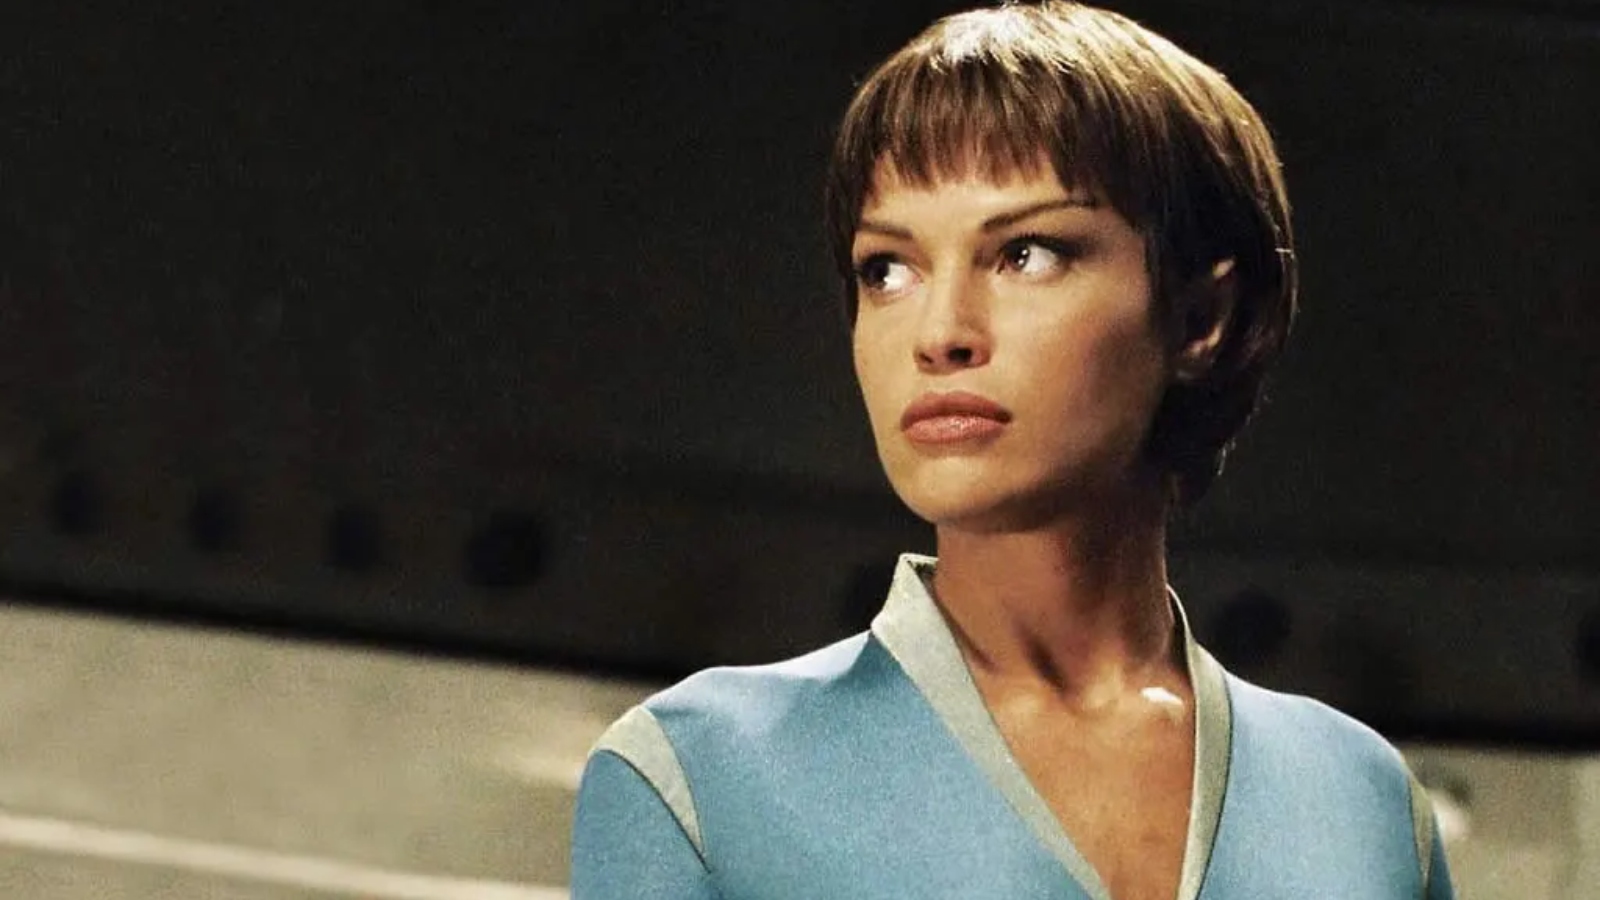 <p><i><span>Star Trek: Enterprise</span></i><span> was a series that was set a century before Captain Kirk took the helm of the Enterprise. Jolene Blalock played T’Pol, the Enterprise’s Science Officer. Enterprise co-creator said of the T’Pol character when casting, “We wanted a sexy Vulcan, a Kim Cattrall-type, and we definitely got that” with Blalock.</span></p>